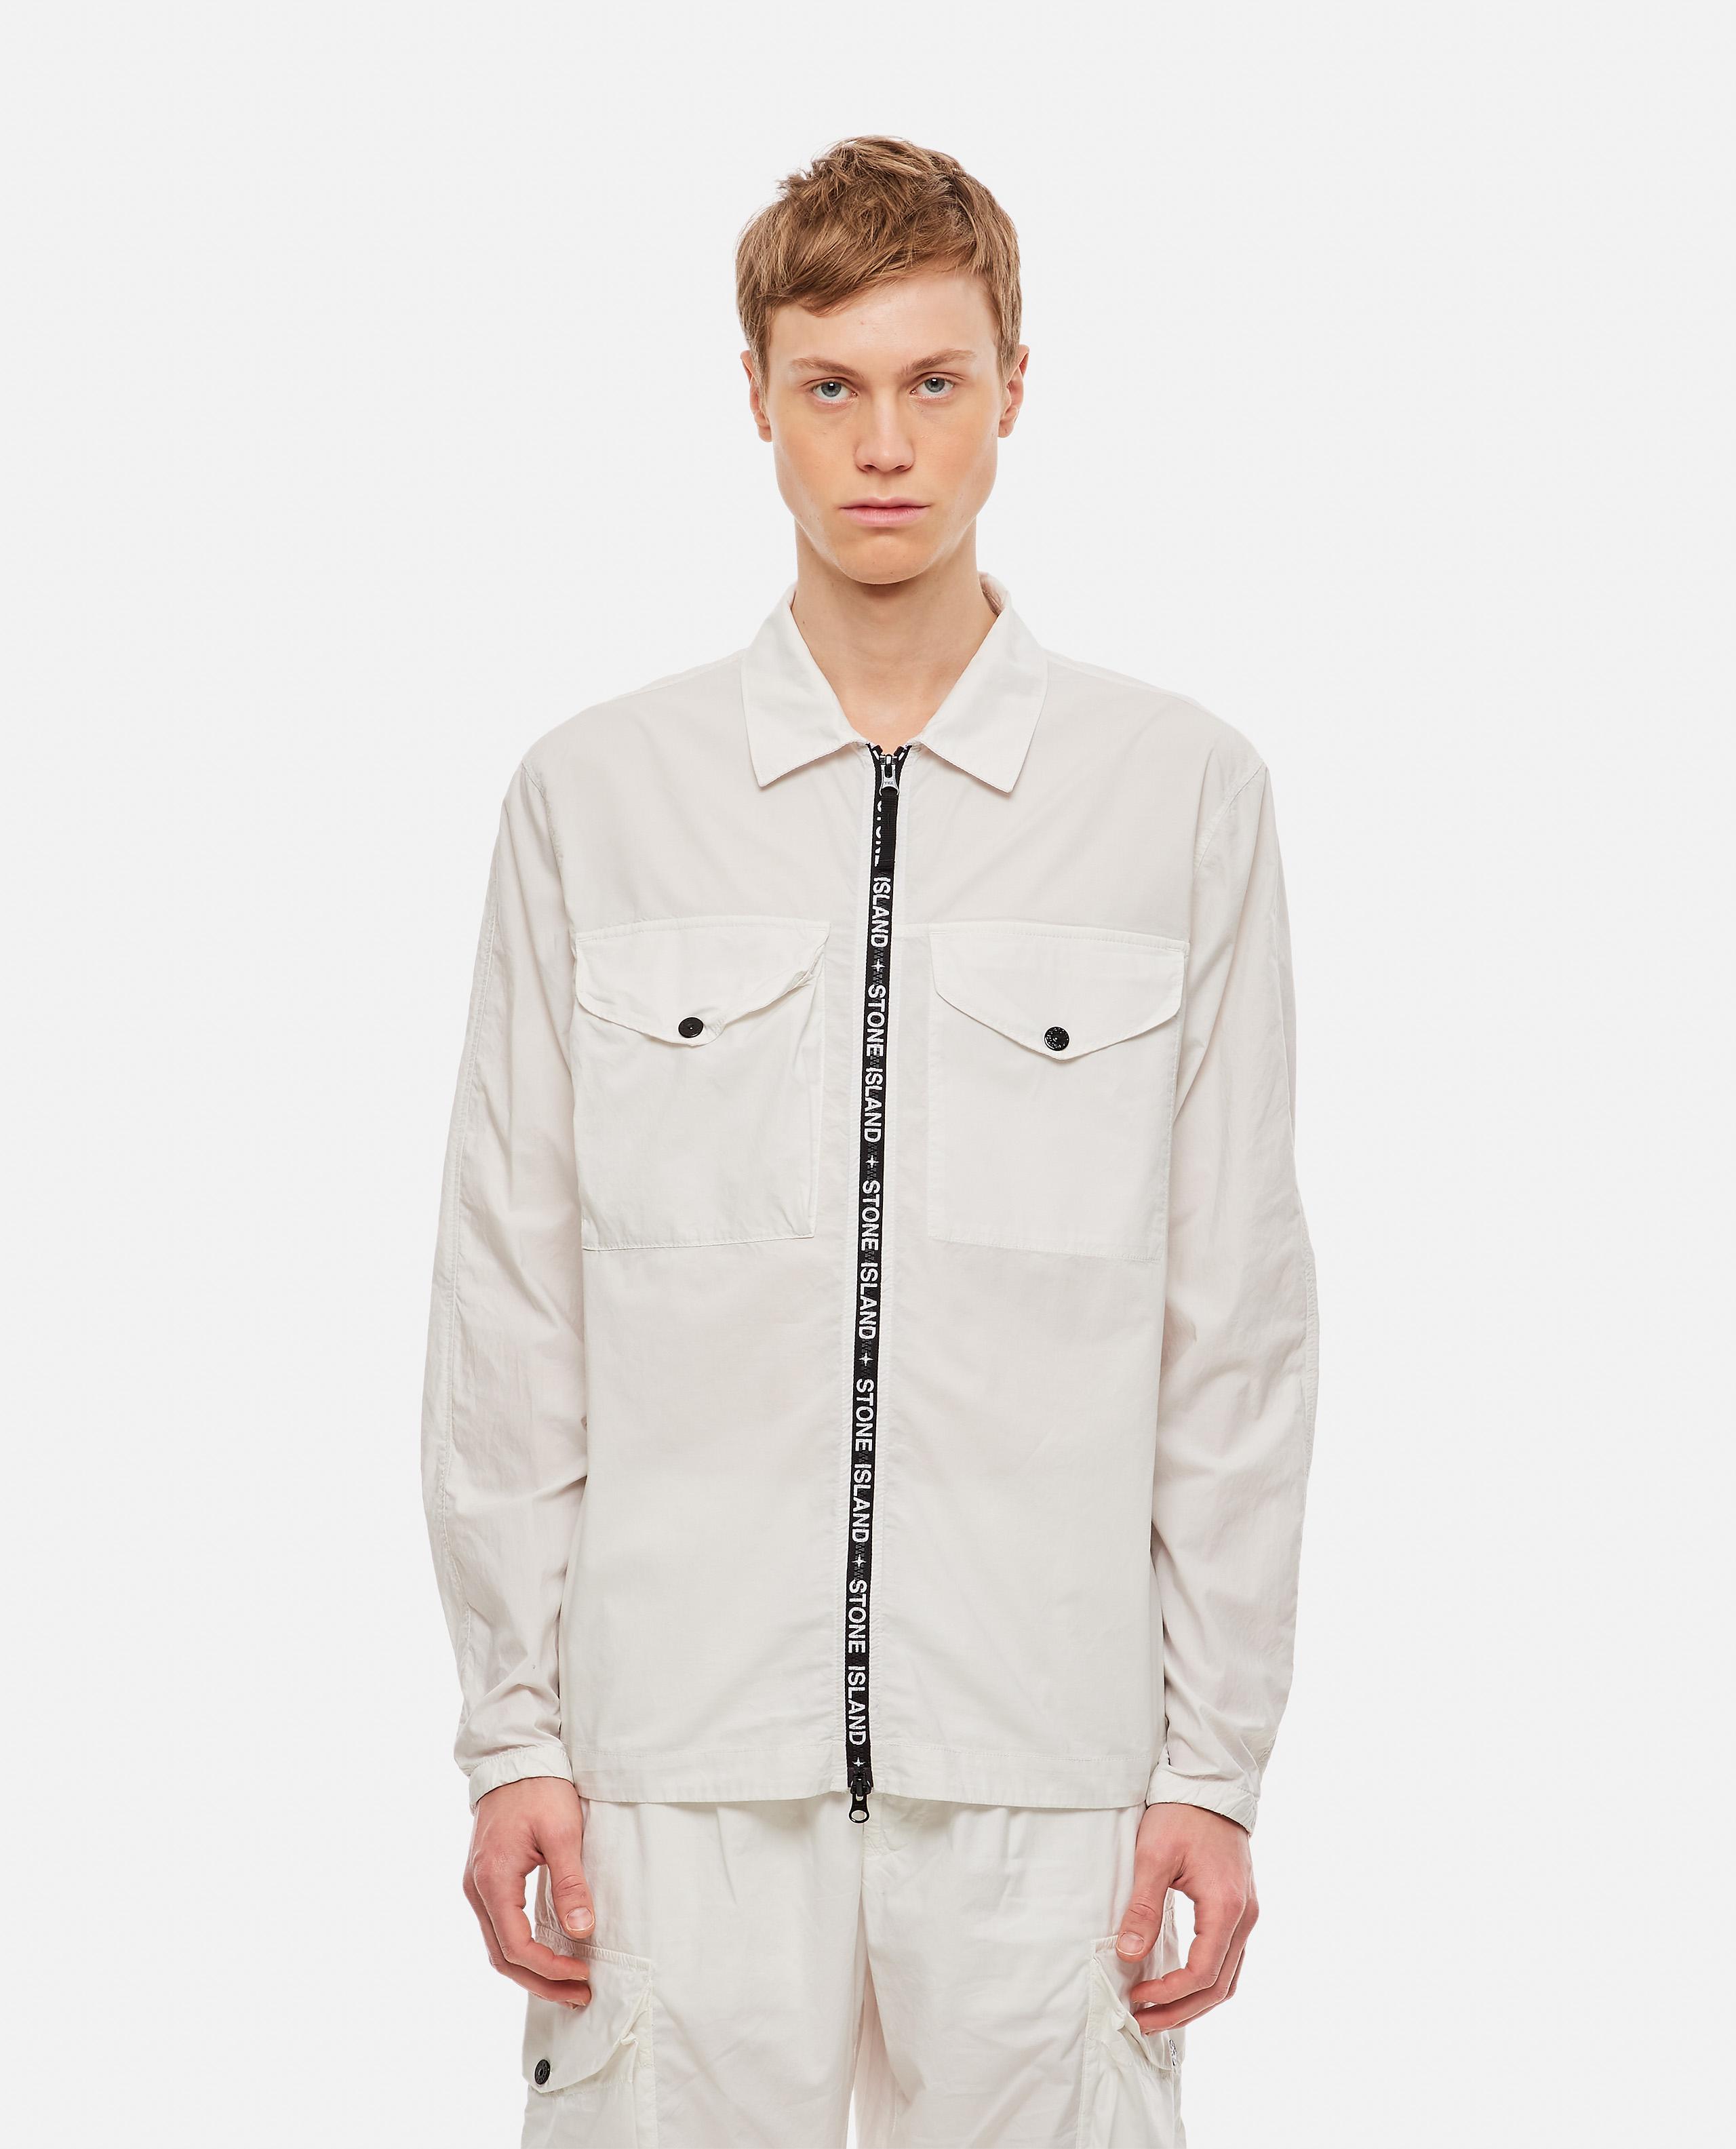 Stone Island Stretch Cotton Overshirt in White for Men | Lyst